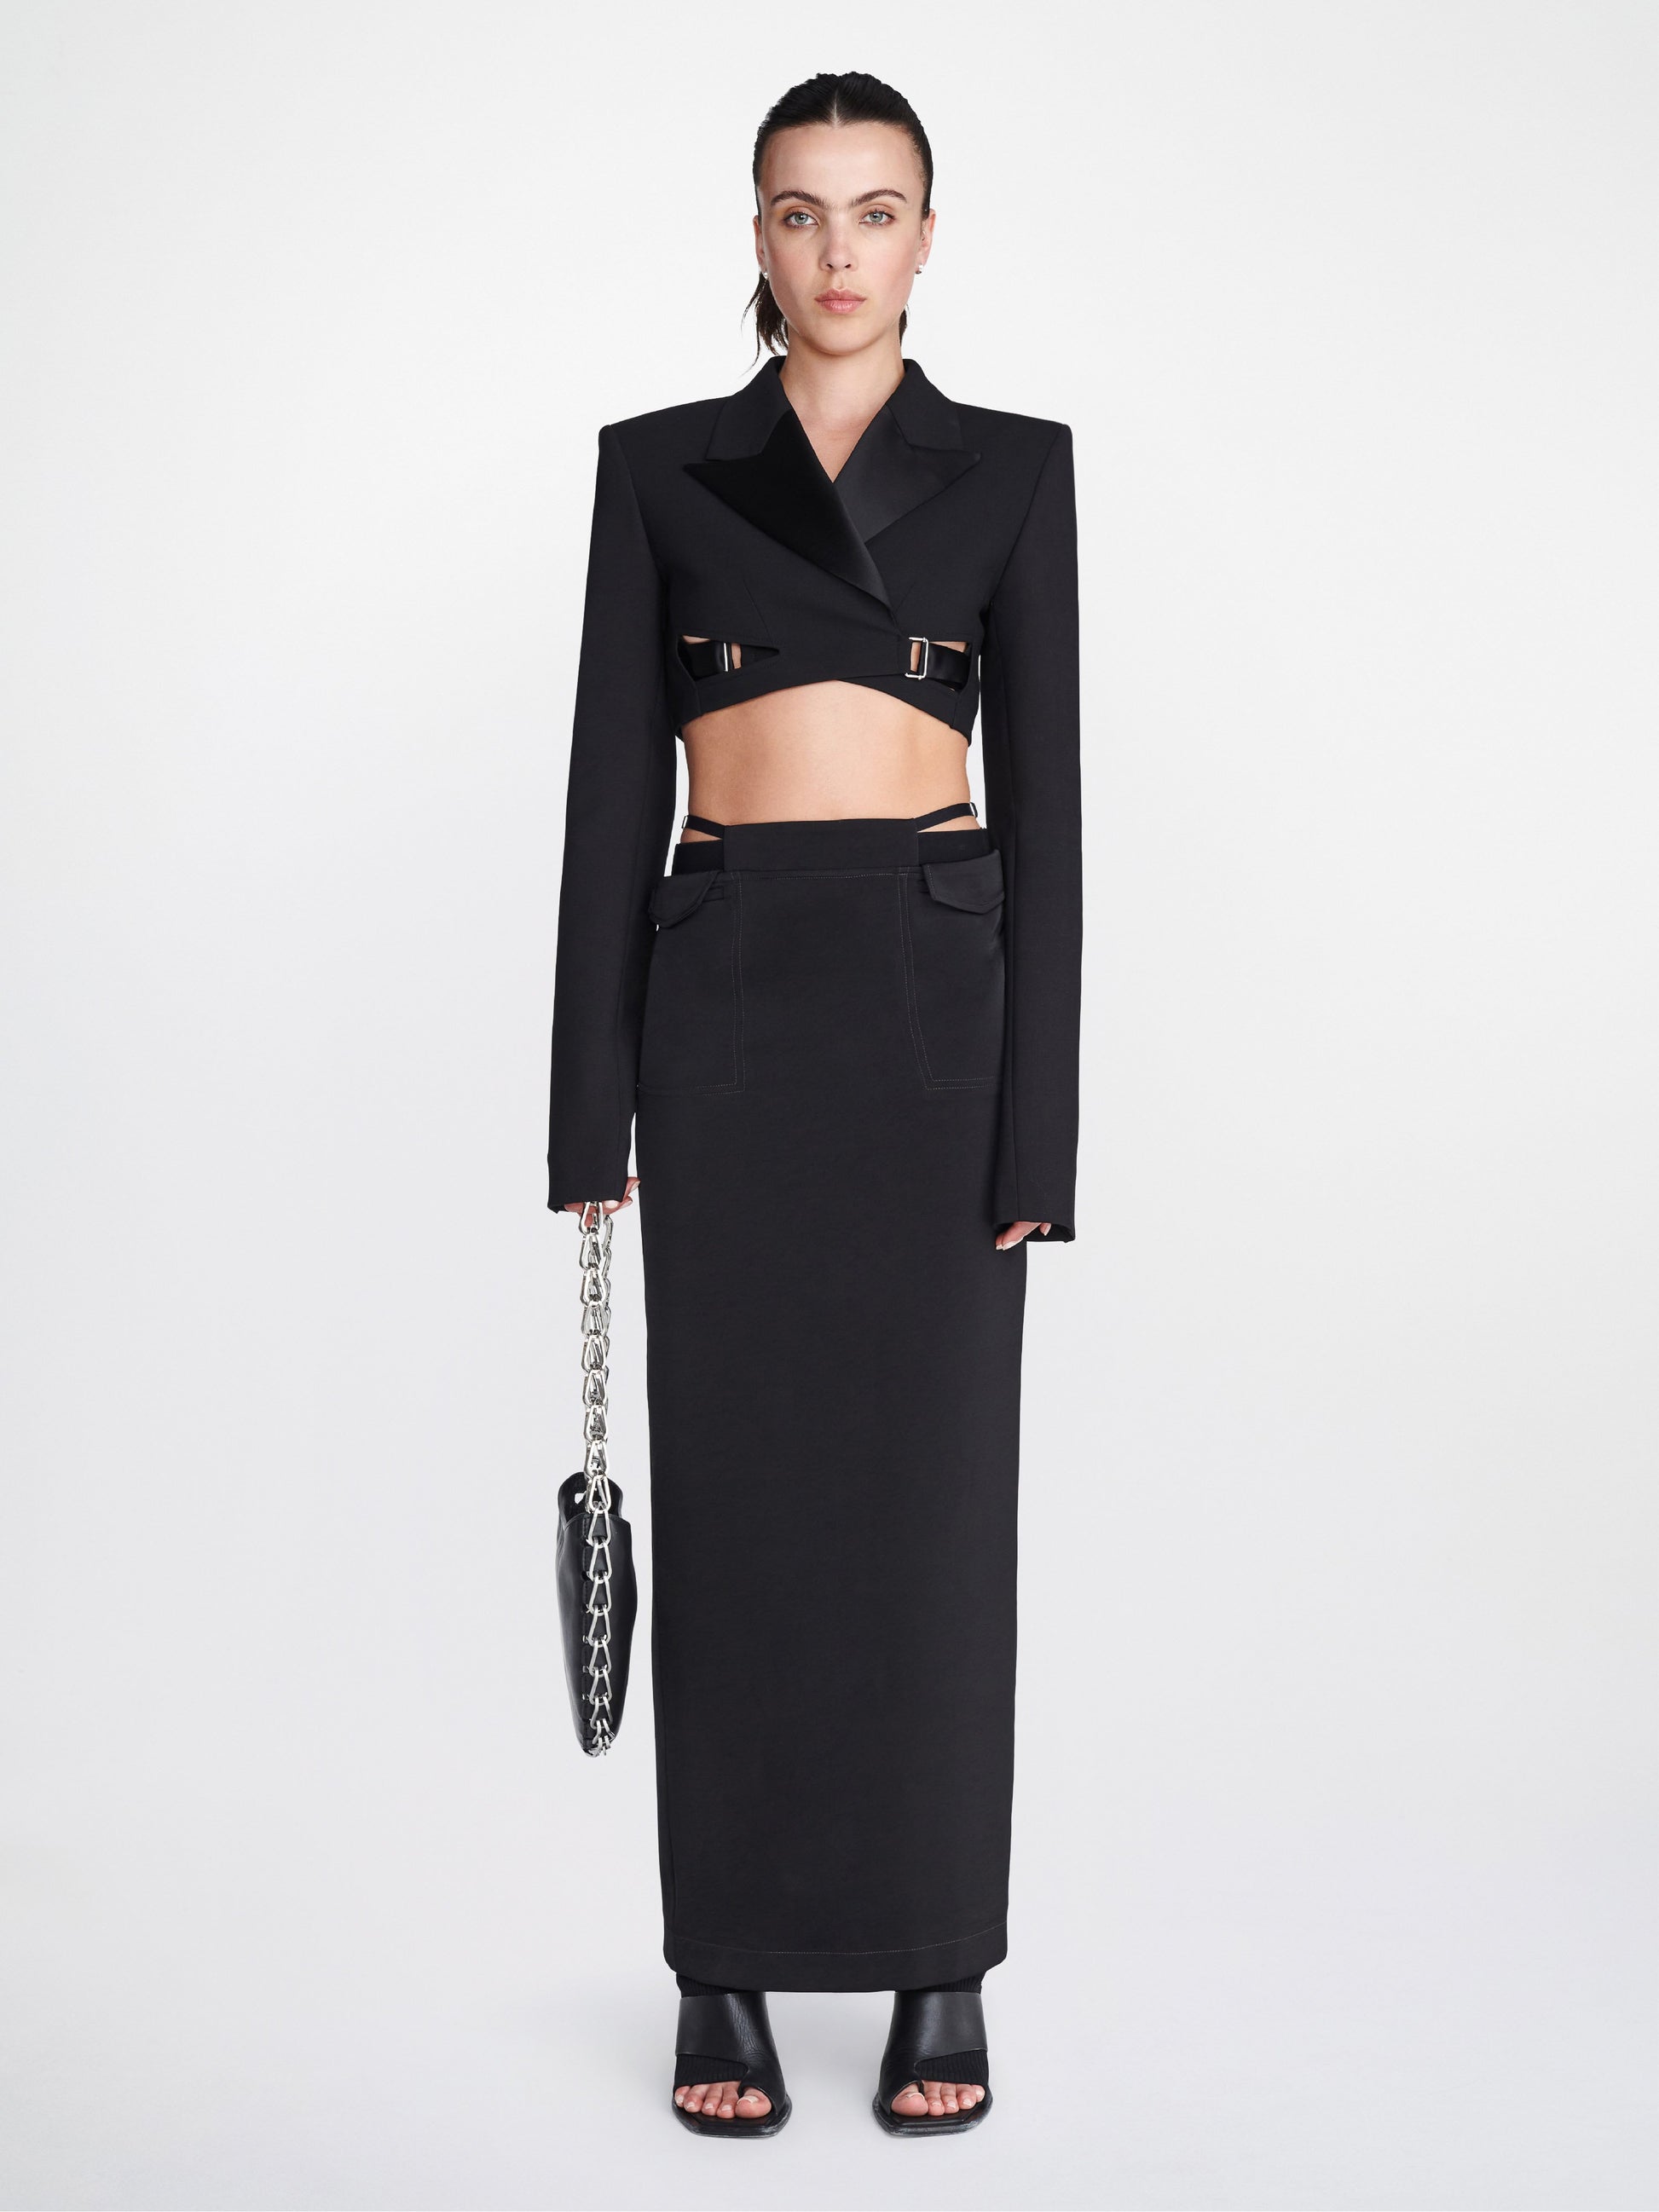 The Dion Lee Pocket Column Skirt in Black available at The New Trend Australia